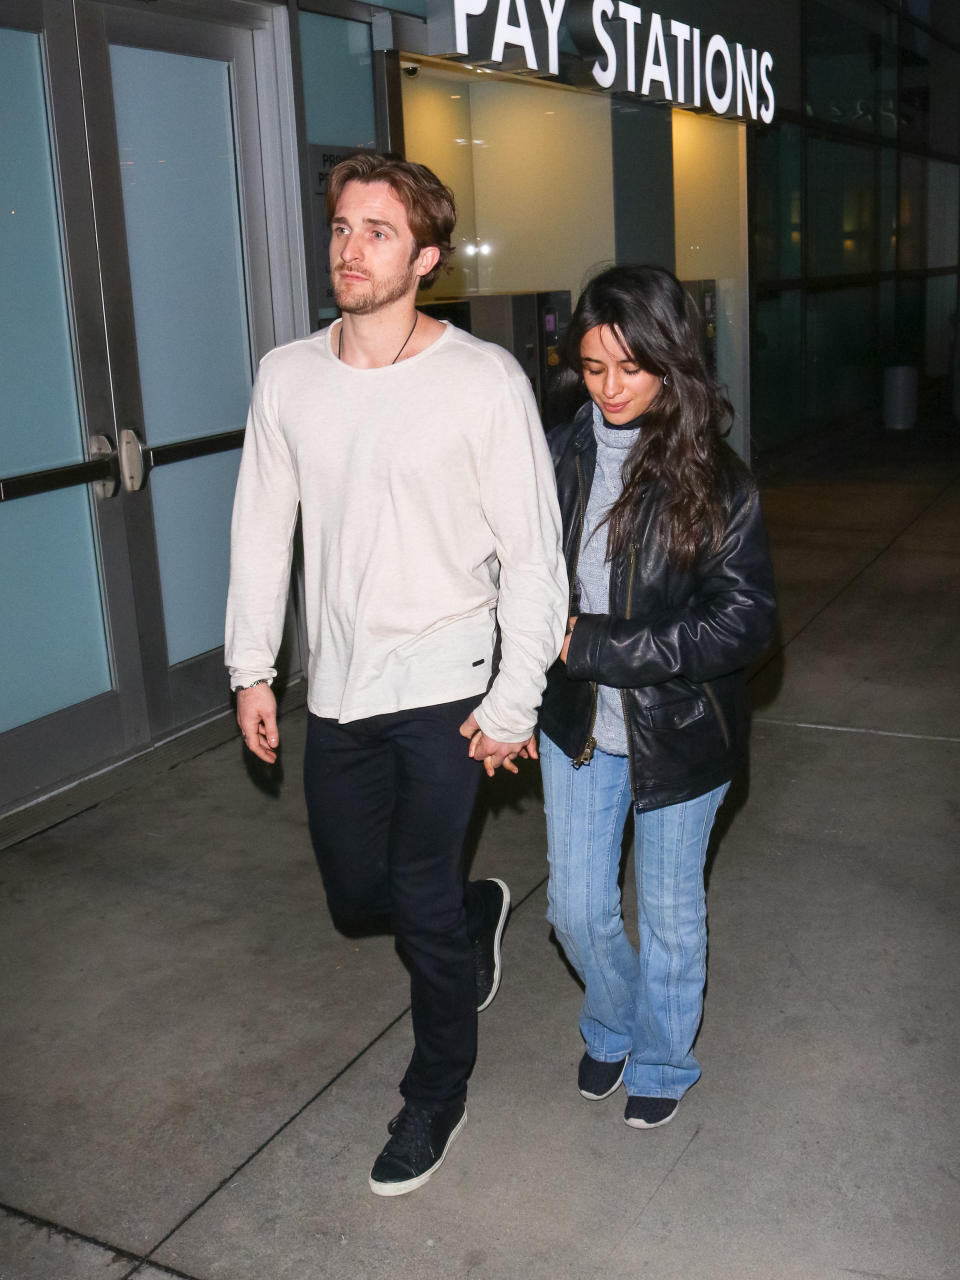 Matthew Hussey and Camilla Cabello holding hands while walking outside a building at night